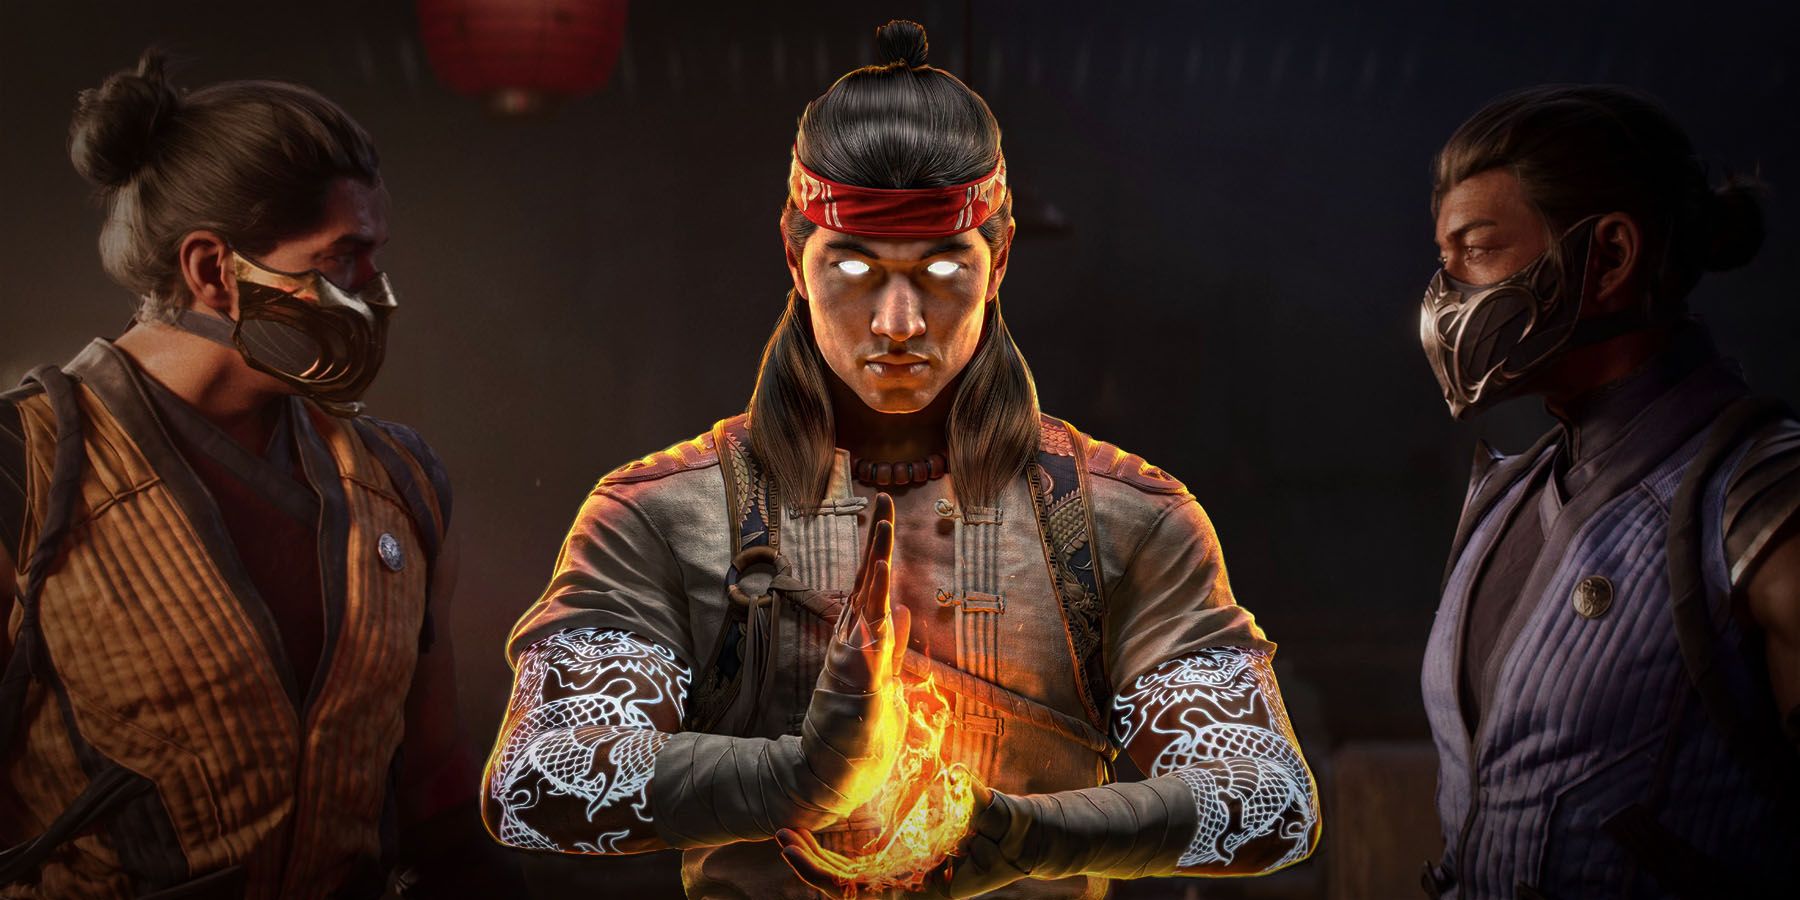 How to Play Mortal Kombat 1 Early (Early Access Details)